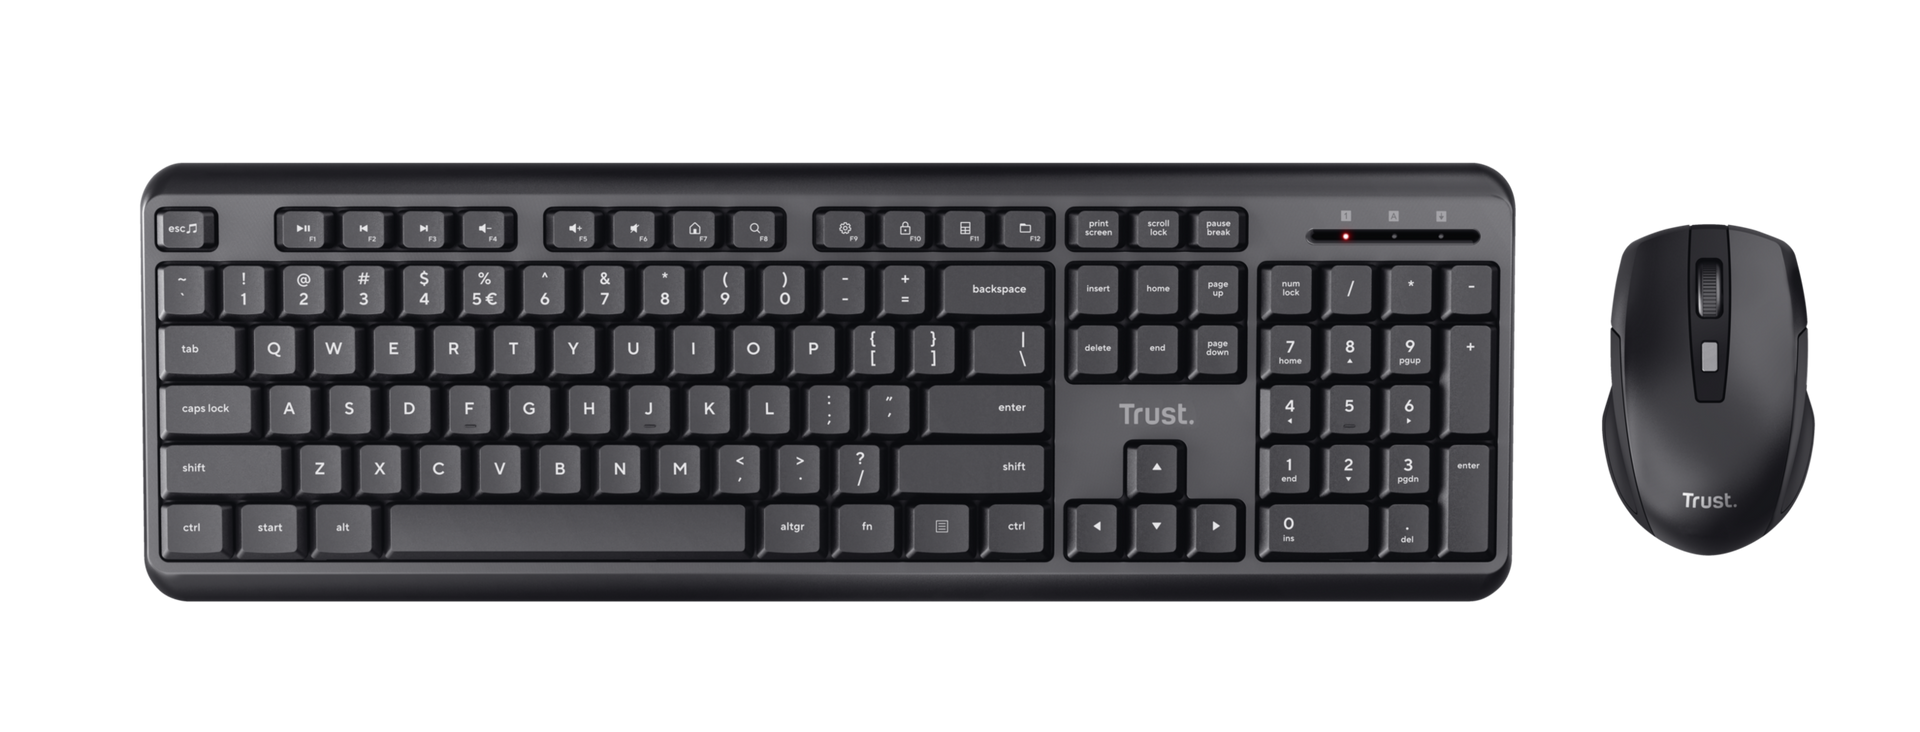 Ymo Wireless Keyboard and Mouse set-Top